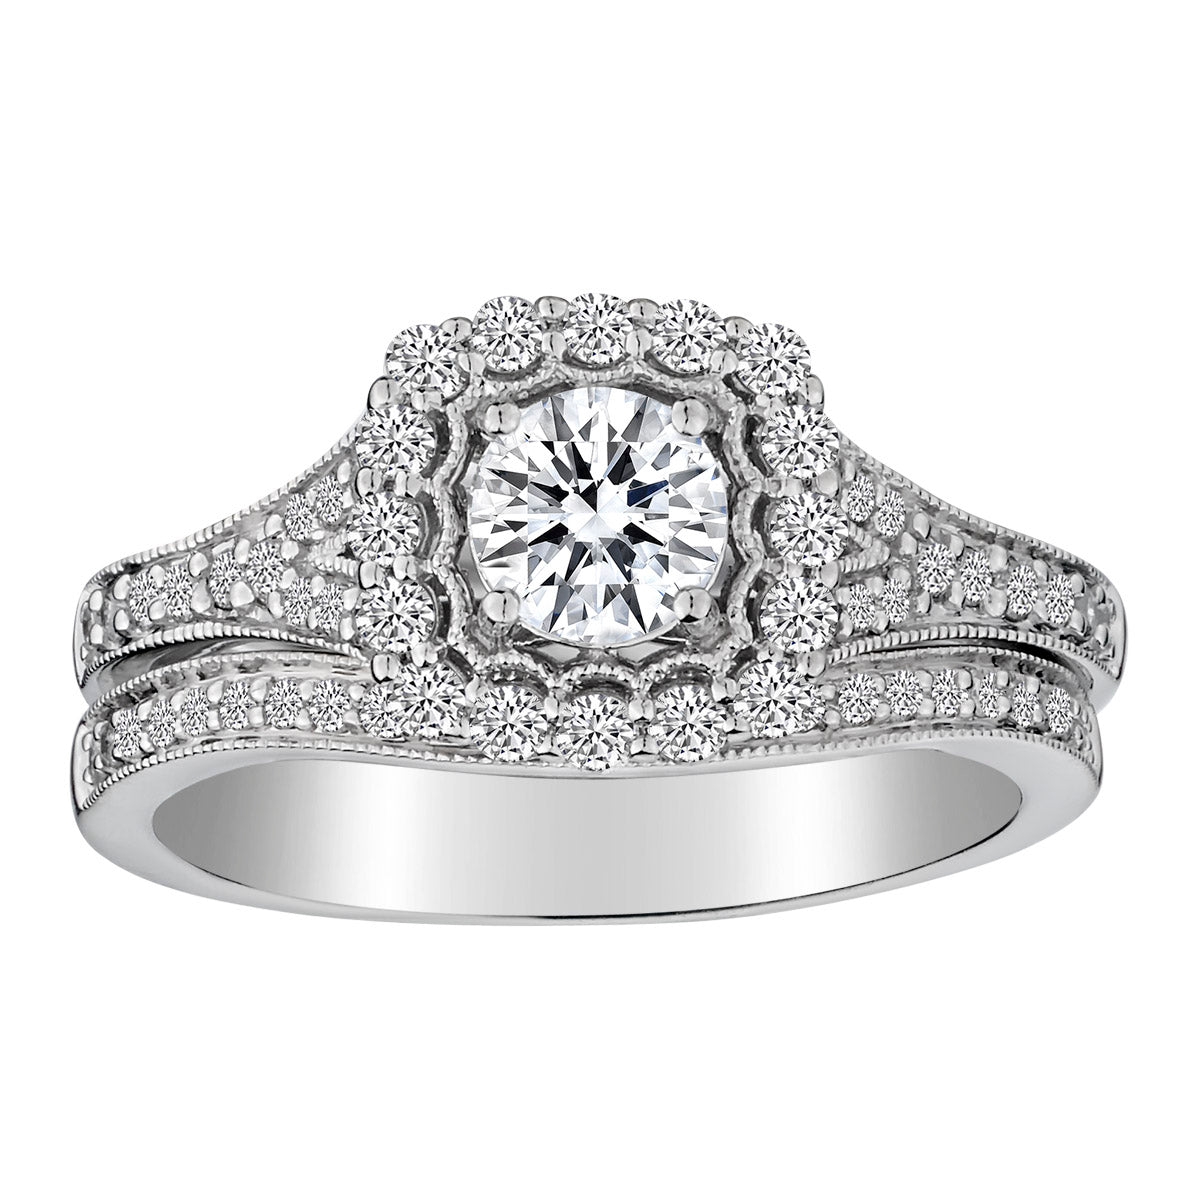 1.00 Carat Diamond Halo Engagement Ring Set, 14kt White Gold. Griffin Jewellery Designs